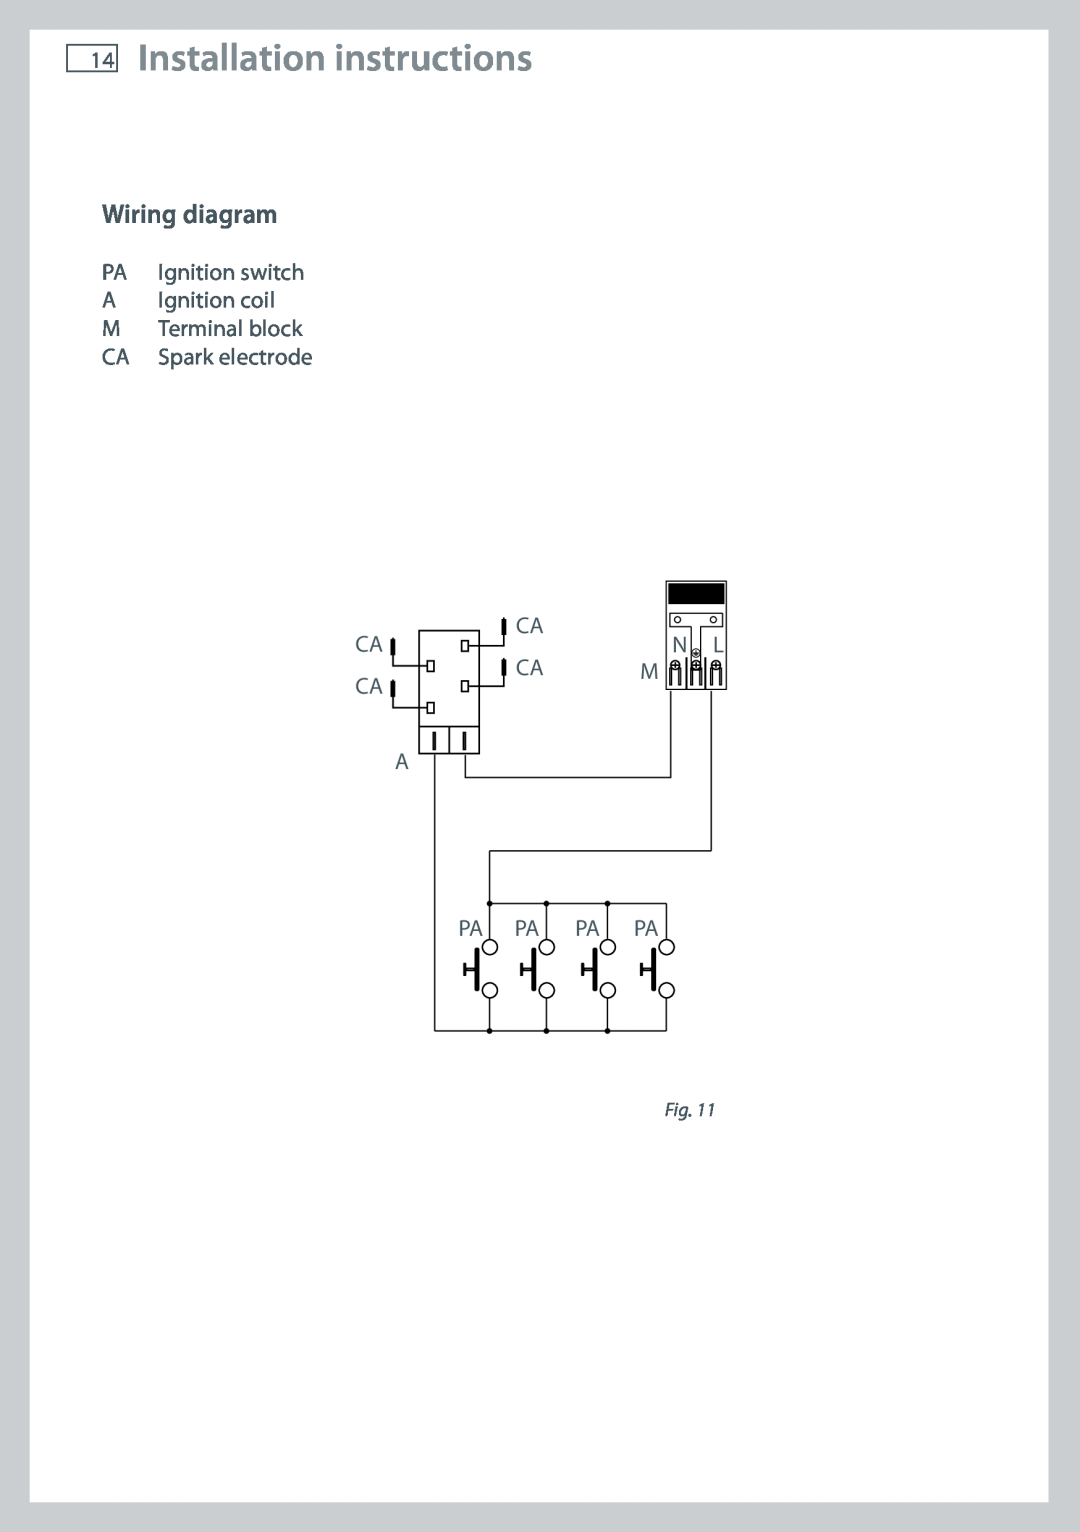 Fisher & Paykel CG604 Wiring diagram, Installation instructions, PA Ignition switch A Ignition coil M Terminal block, N L 